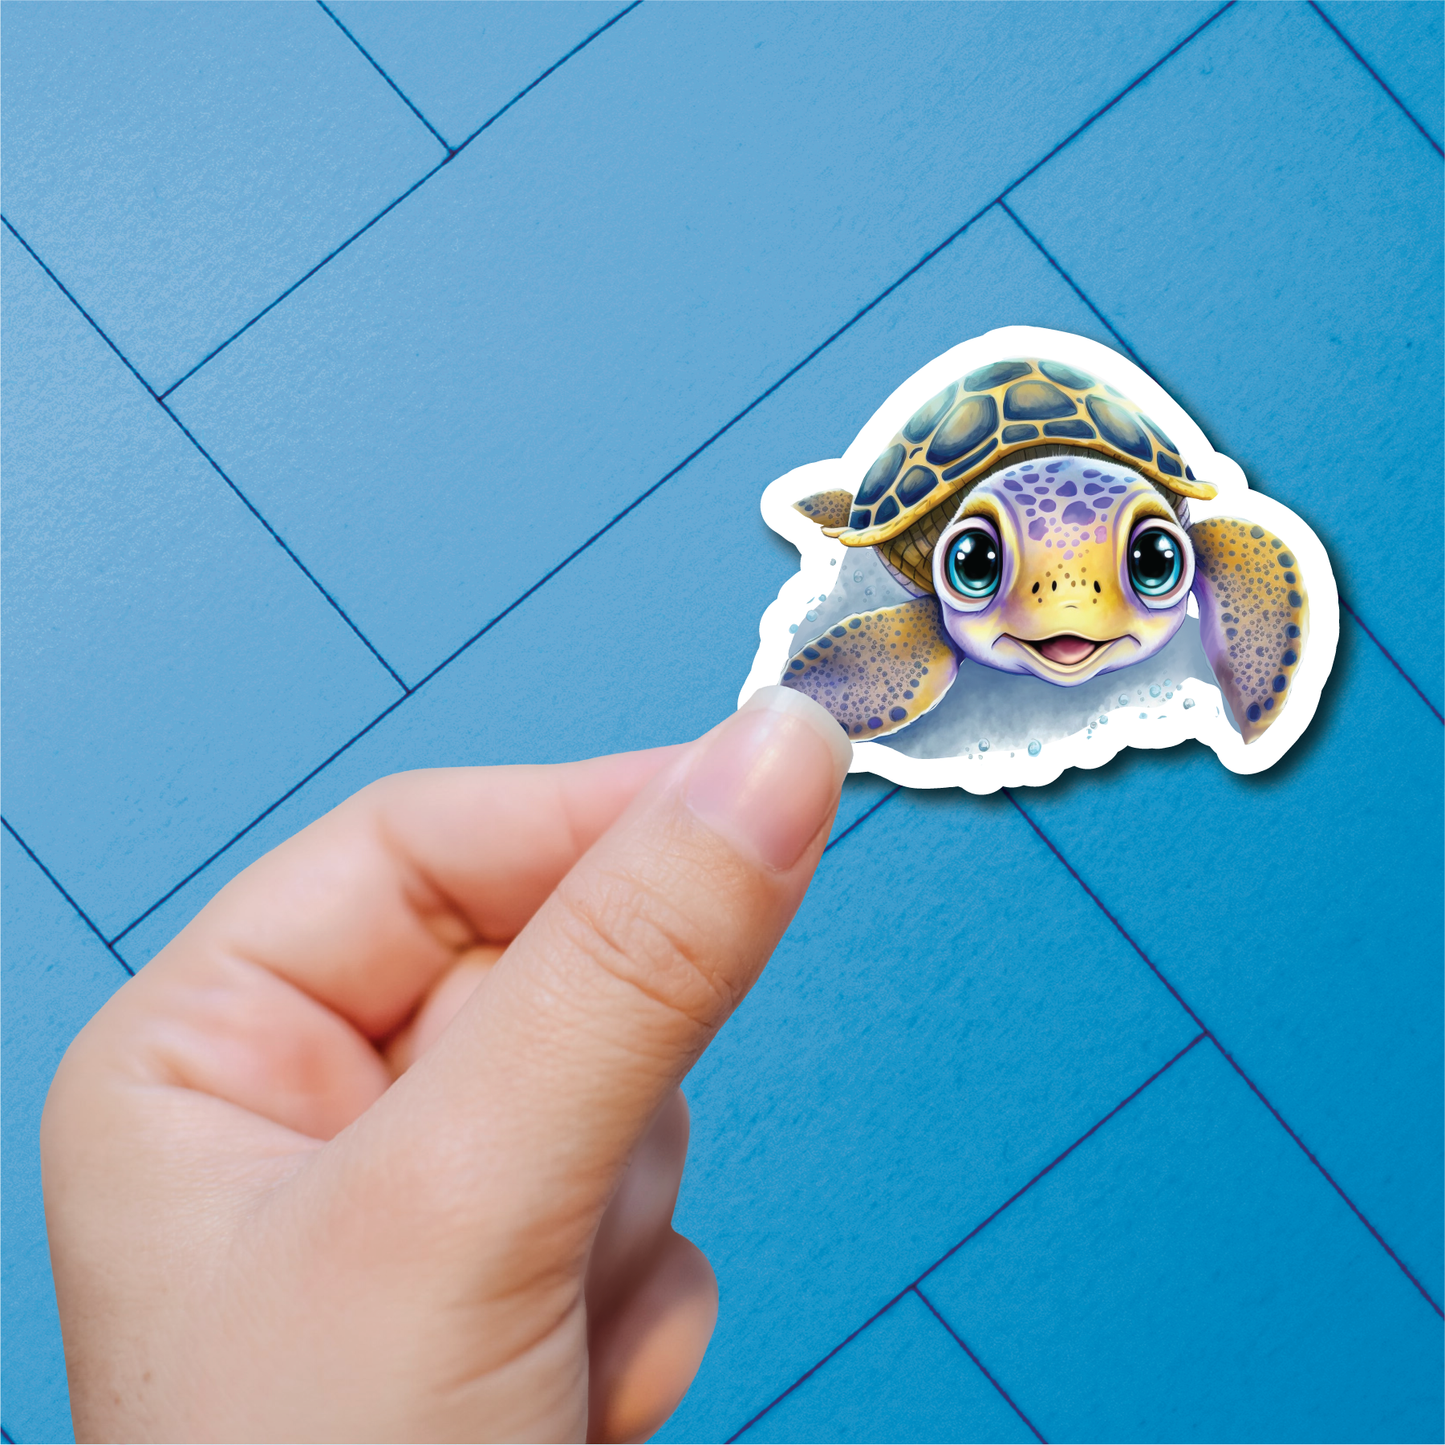 Colorful Sea Turtles - Full Color Vinyl Stickers (SHIPS IN 3-7 BUS DAYS)